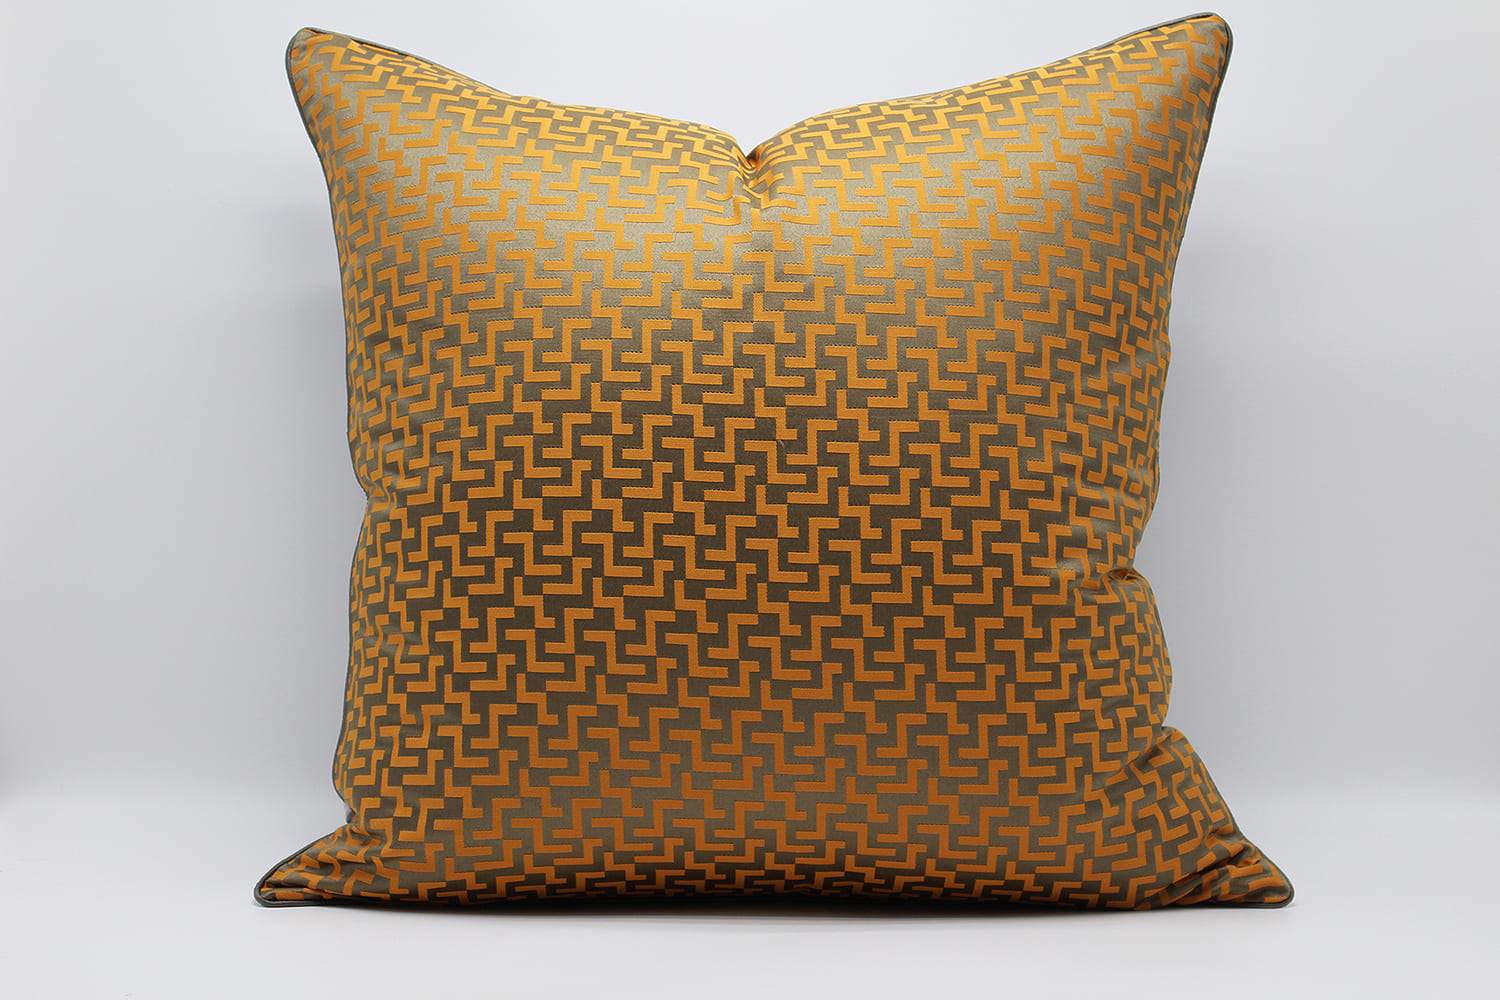 GUCCI BEST GOLDEN PILLOWS & CUSHION- ANGIE HOMES ANGIE HOMES